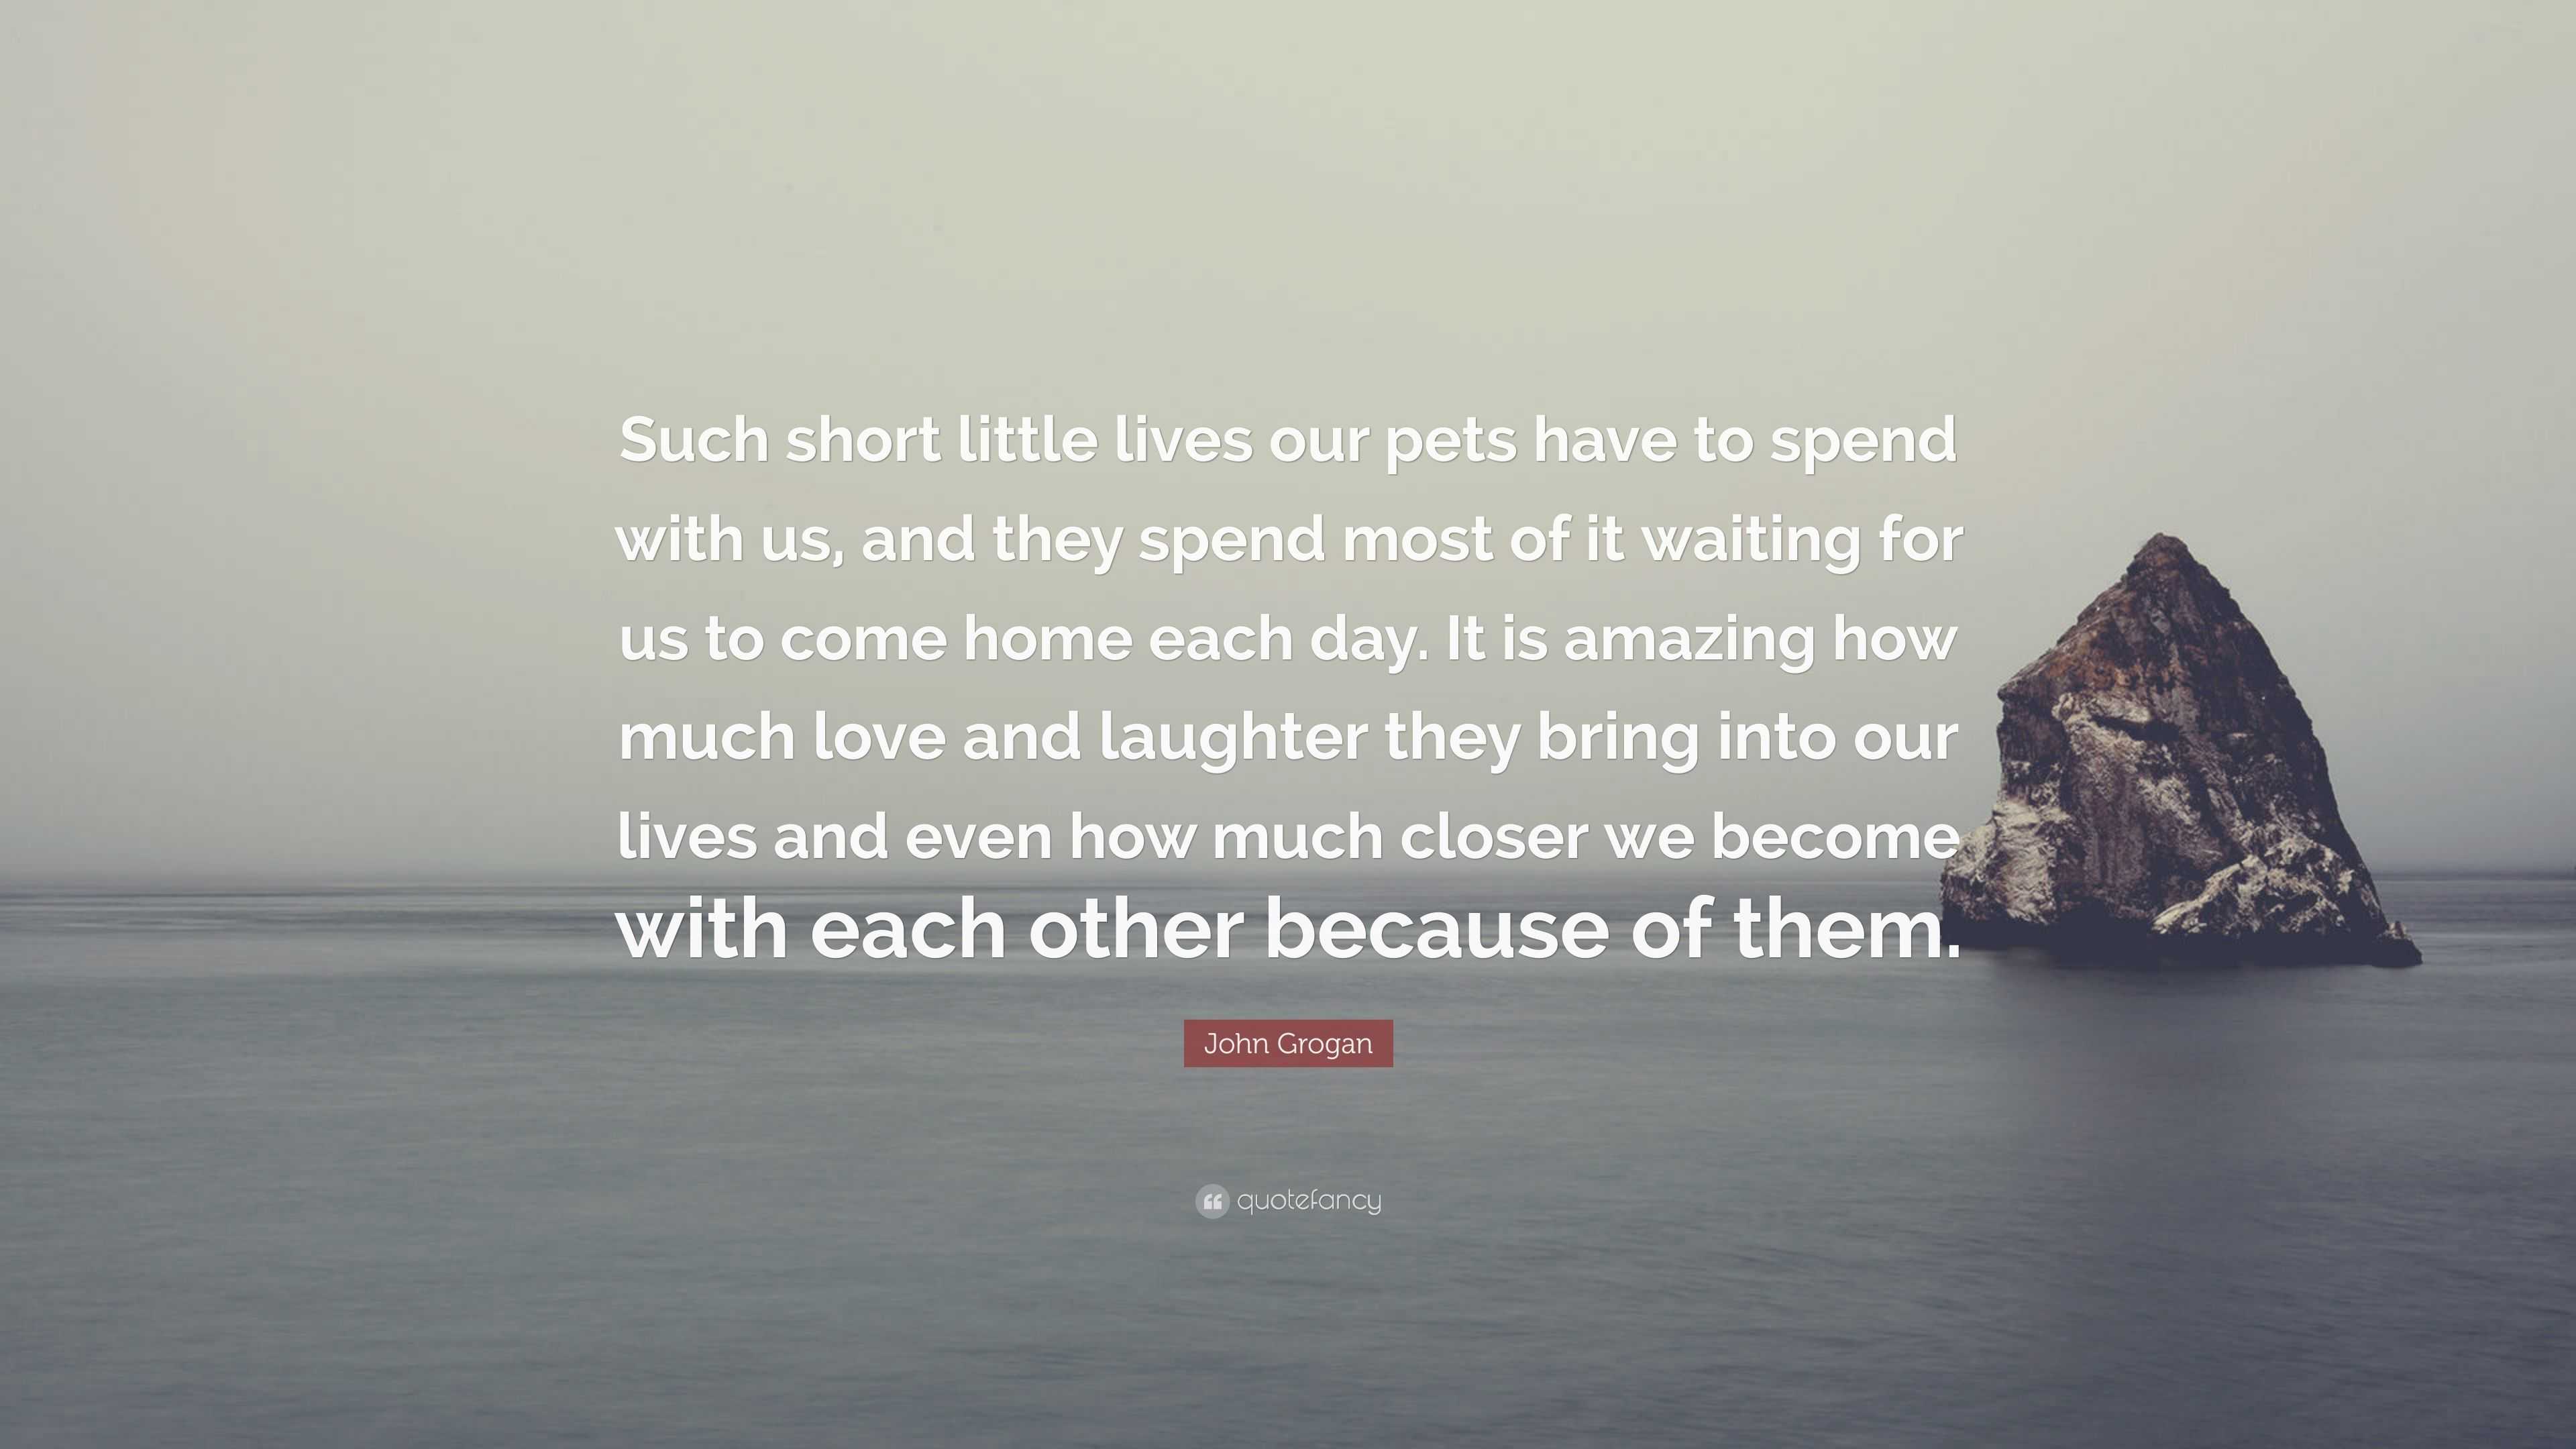 John Grogan Quote: “Such short little lives our pets have to spend with ...